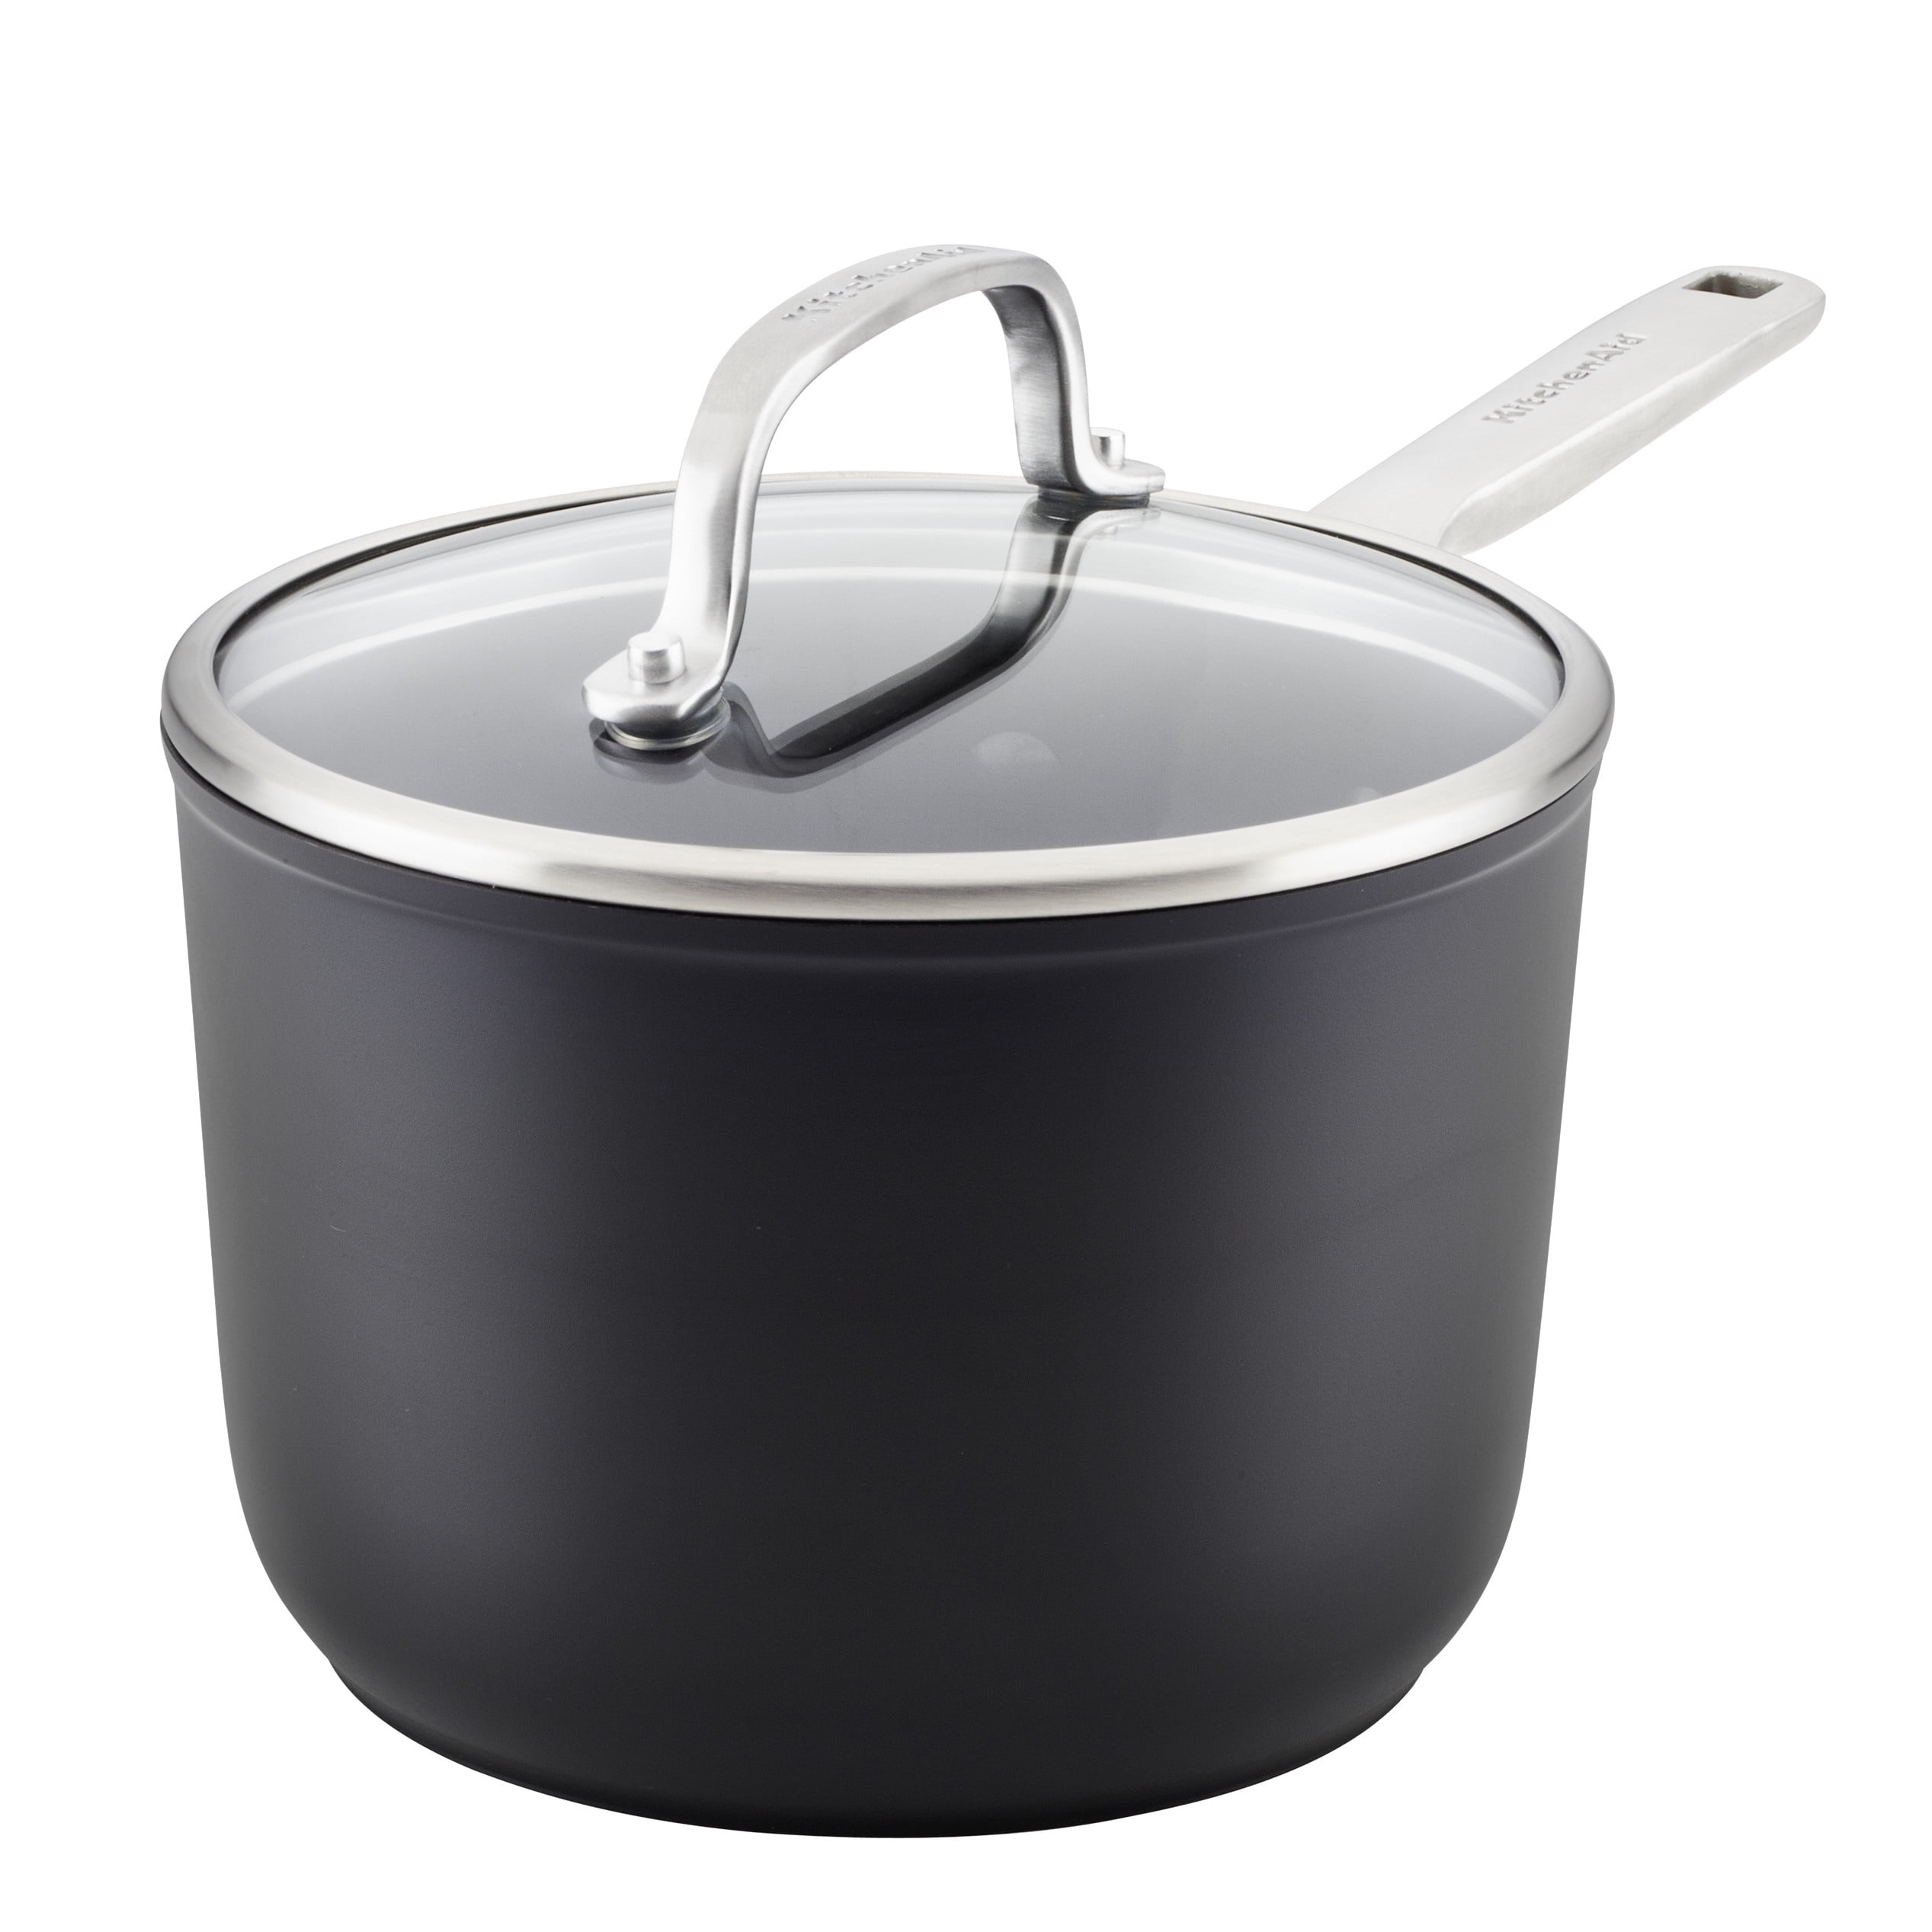 Salerno 4-Quart Induction Ready Stainless Steel Sauce Pan with Lid